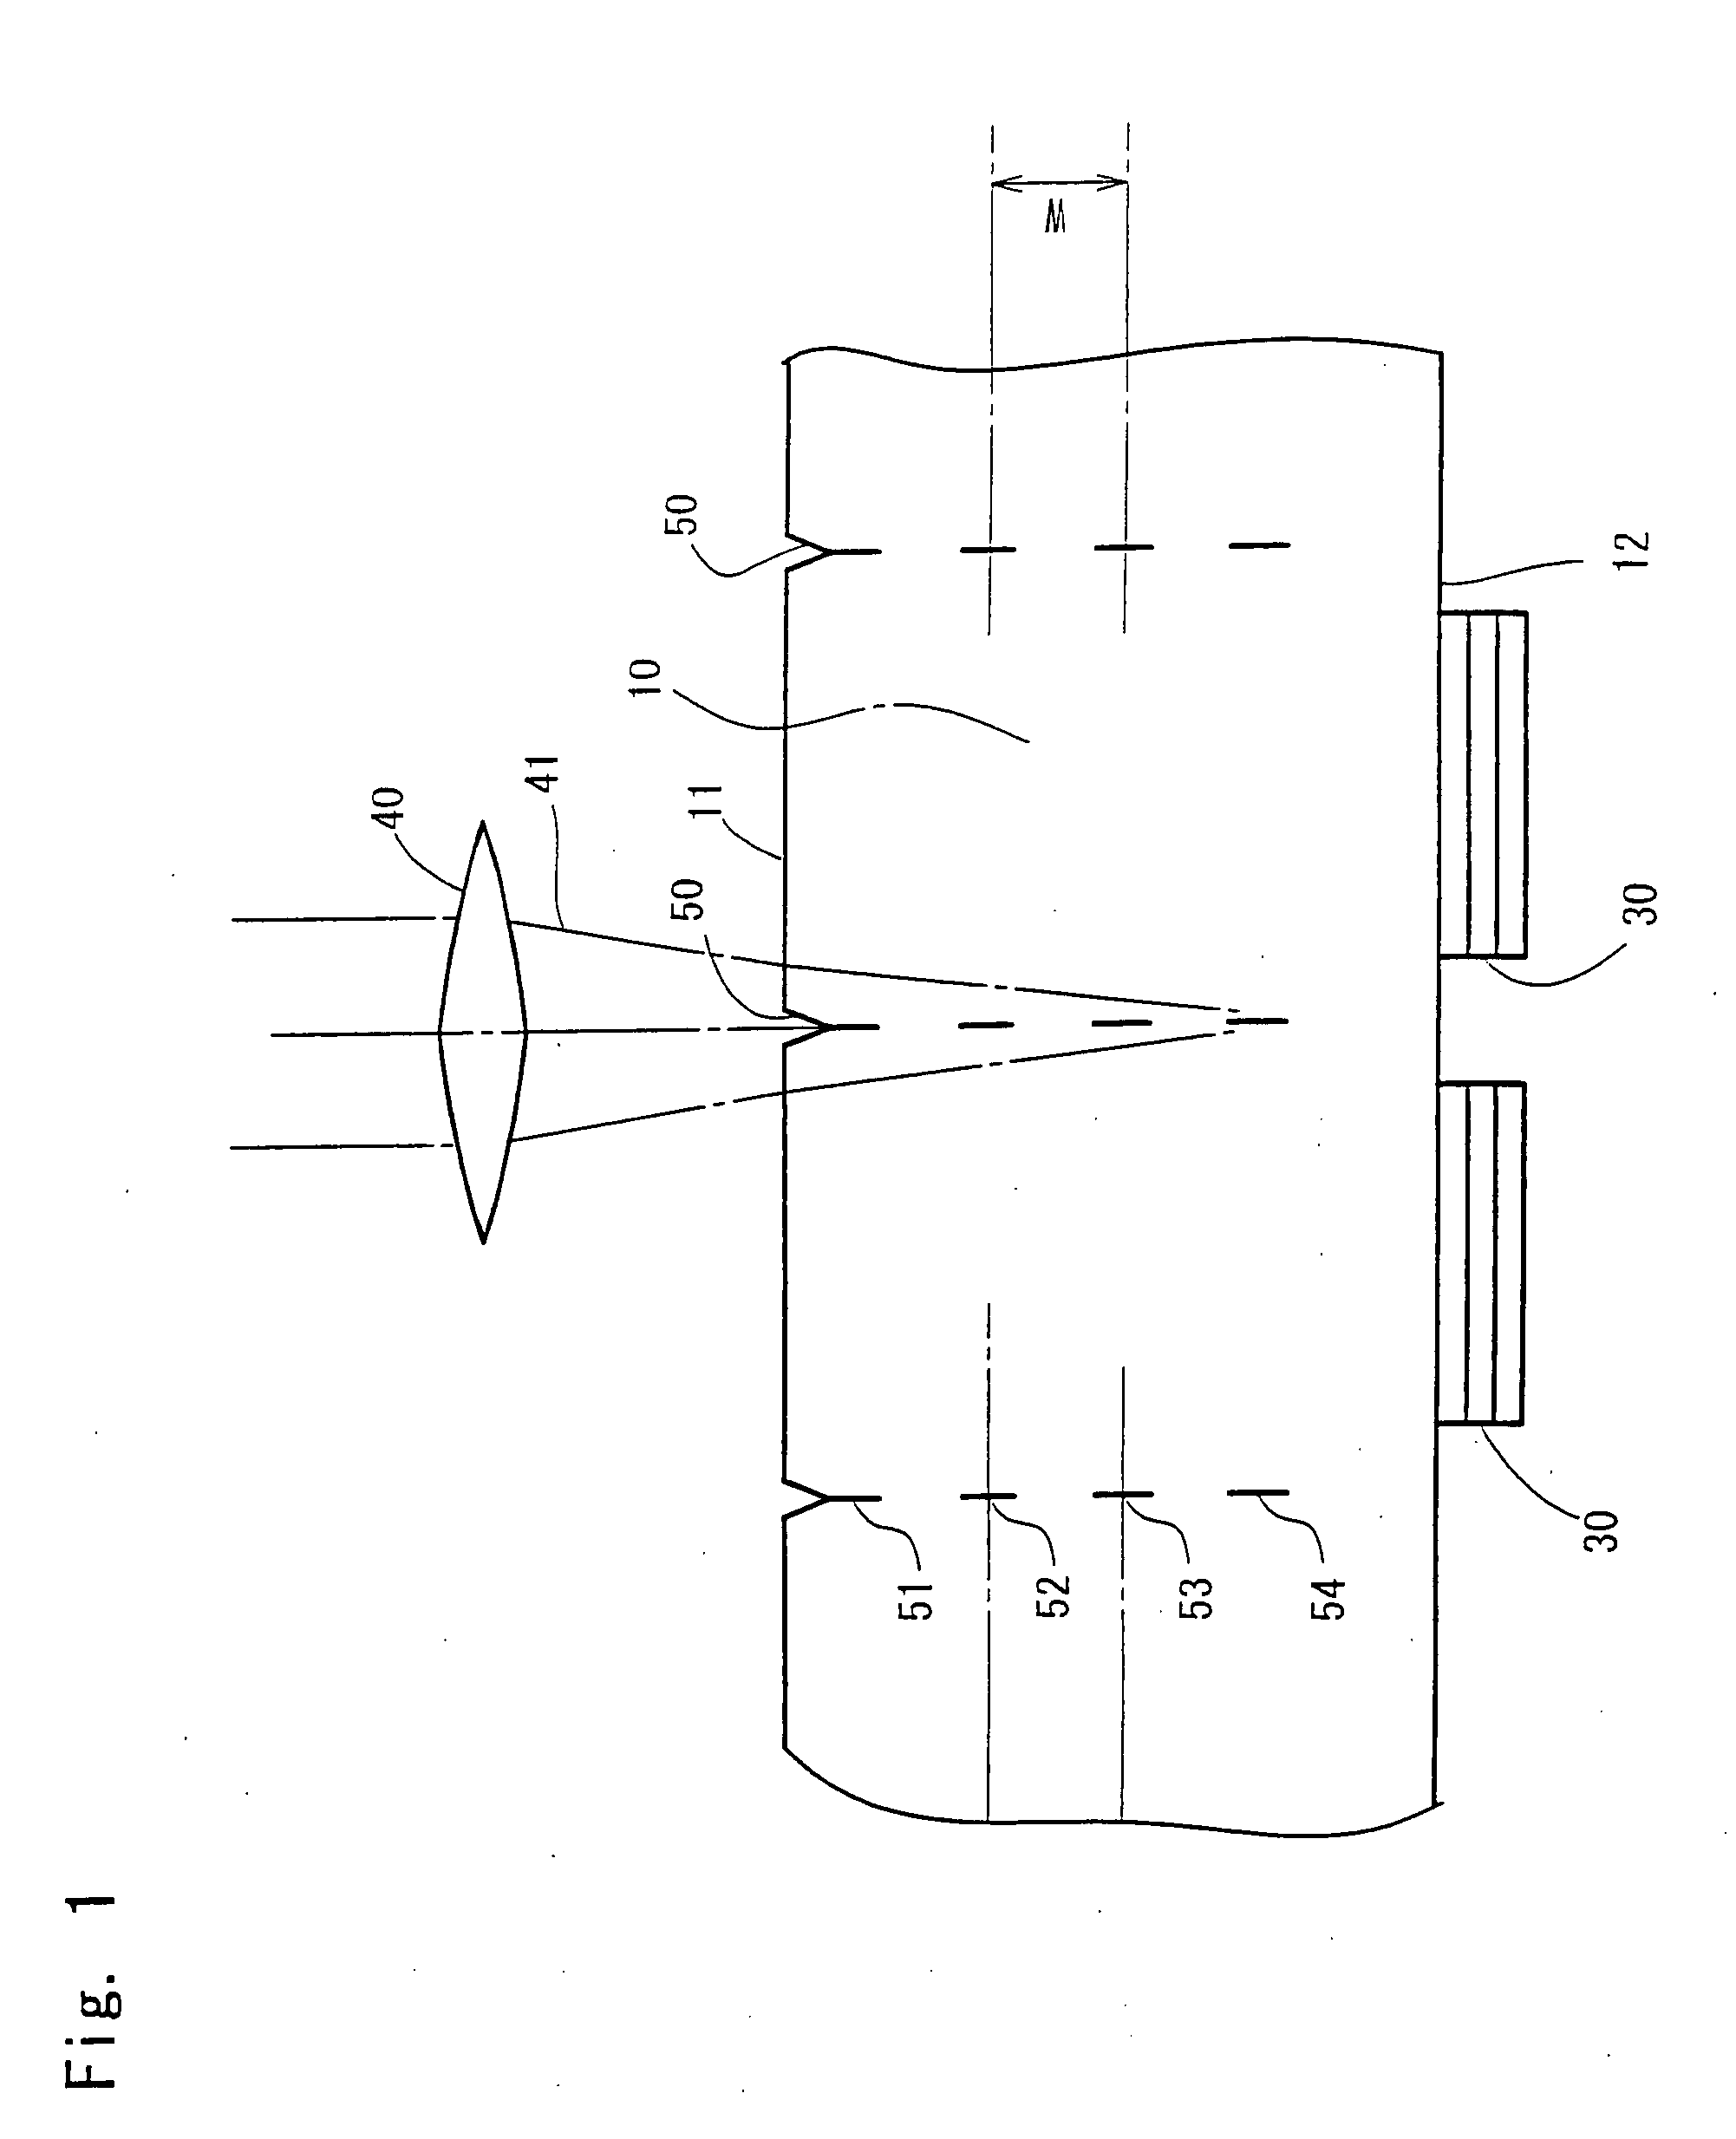 Semiconductor light-emitting device and method for separating semiconductor light-emitting devices